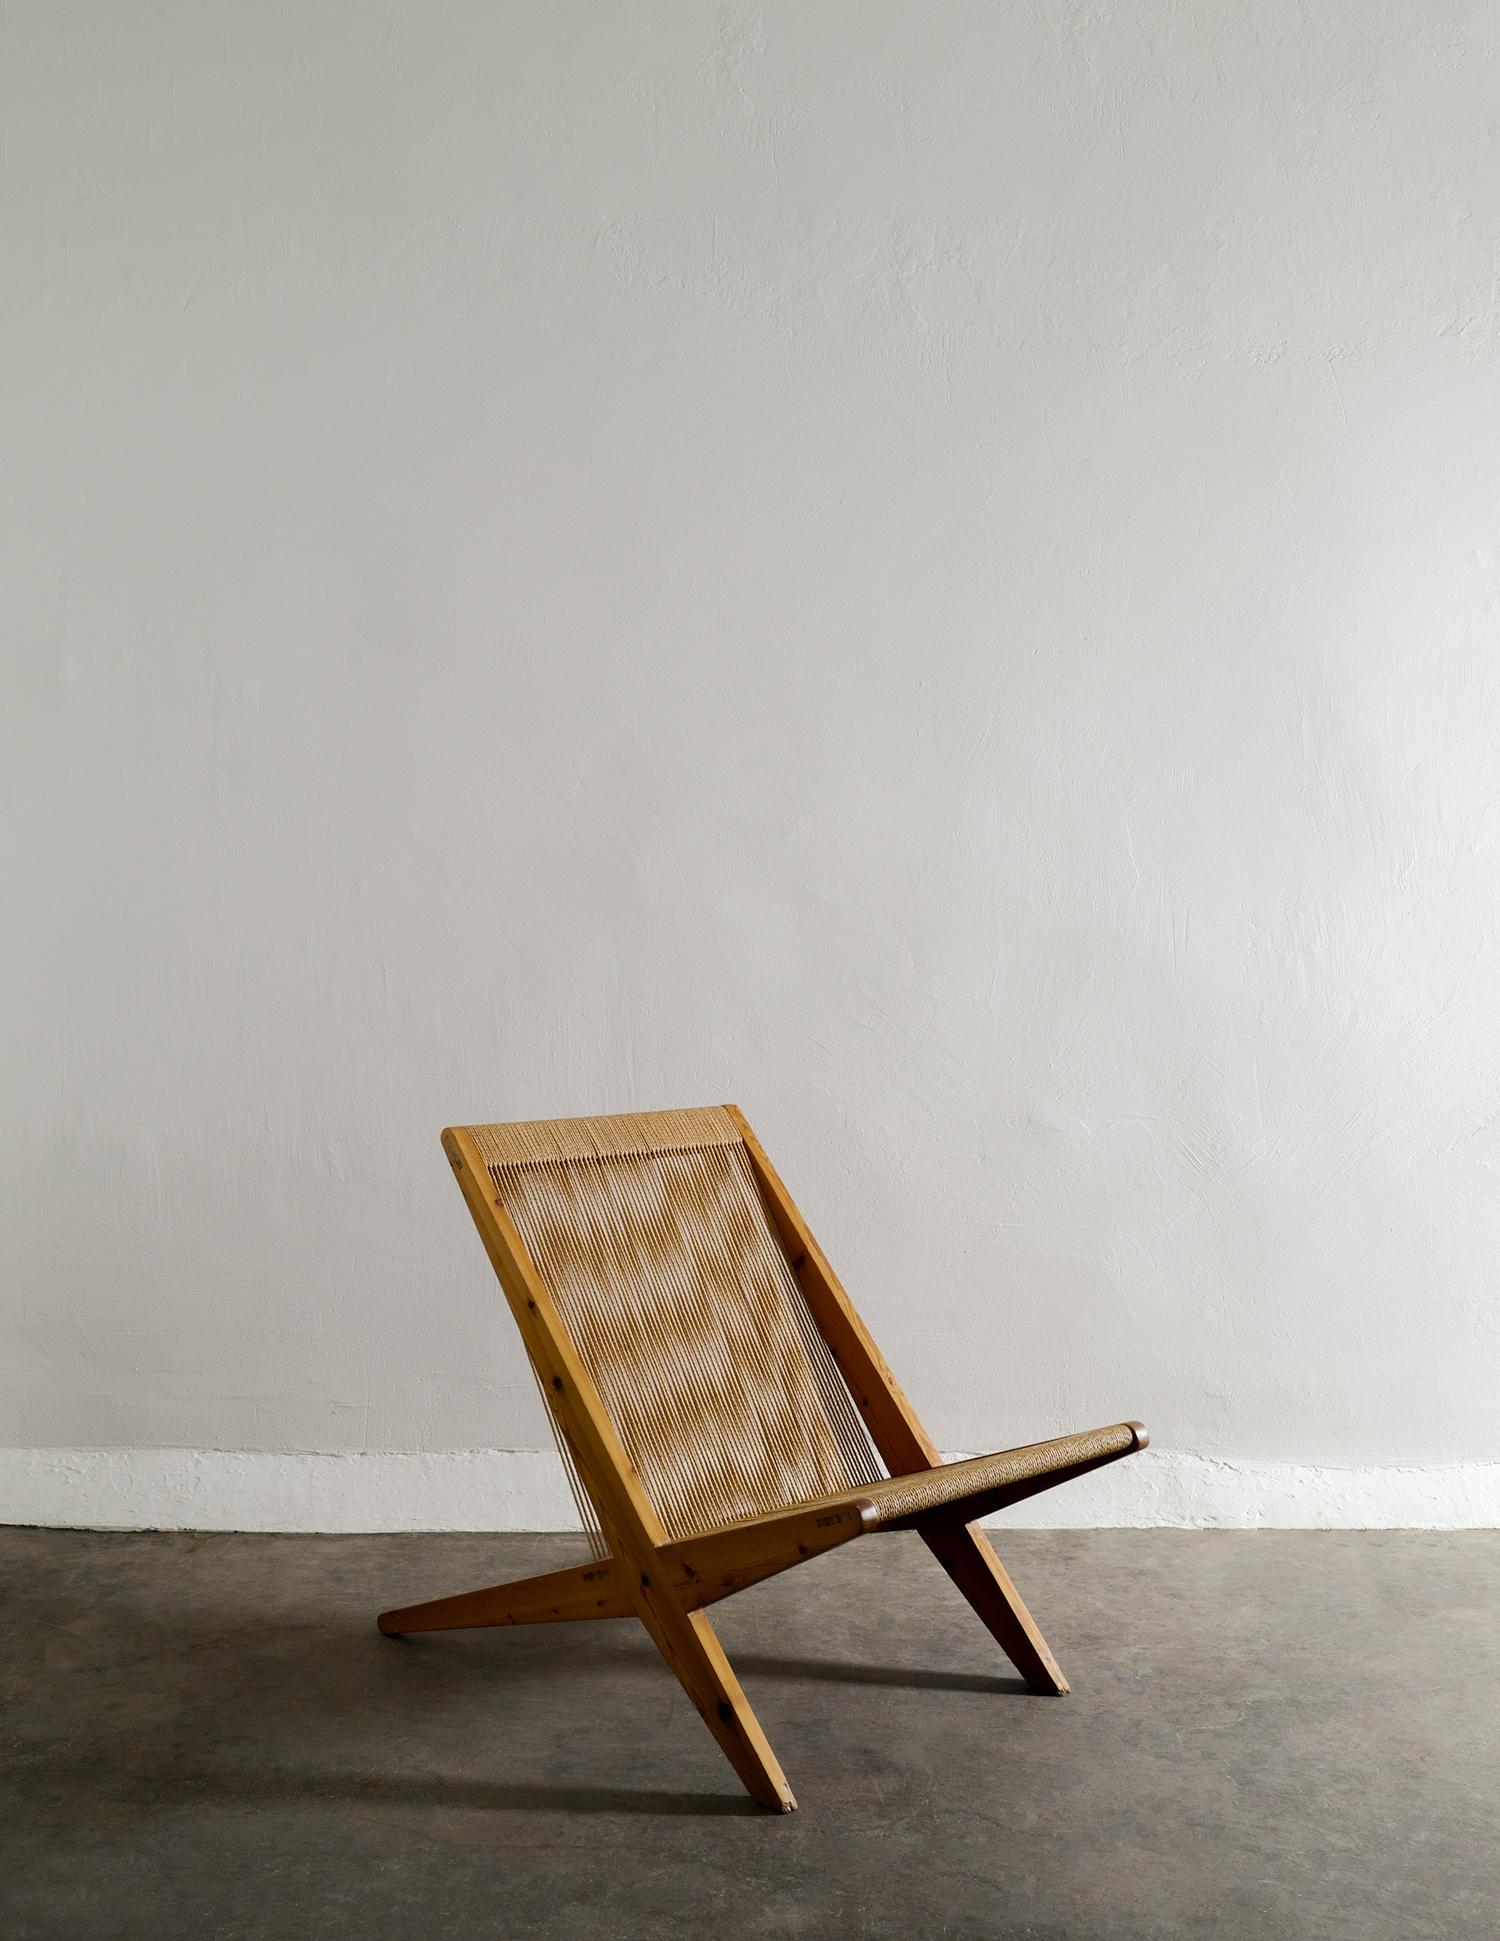 Very rare armless mid century easy lounge chair in pine and papercord in style of Poul Kjærholm and Jørgen Høj produced in Denmark in the 1960s. In good vintage and original condition with patina from age and use. No breaks or damages in the